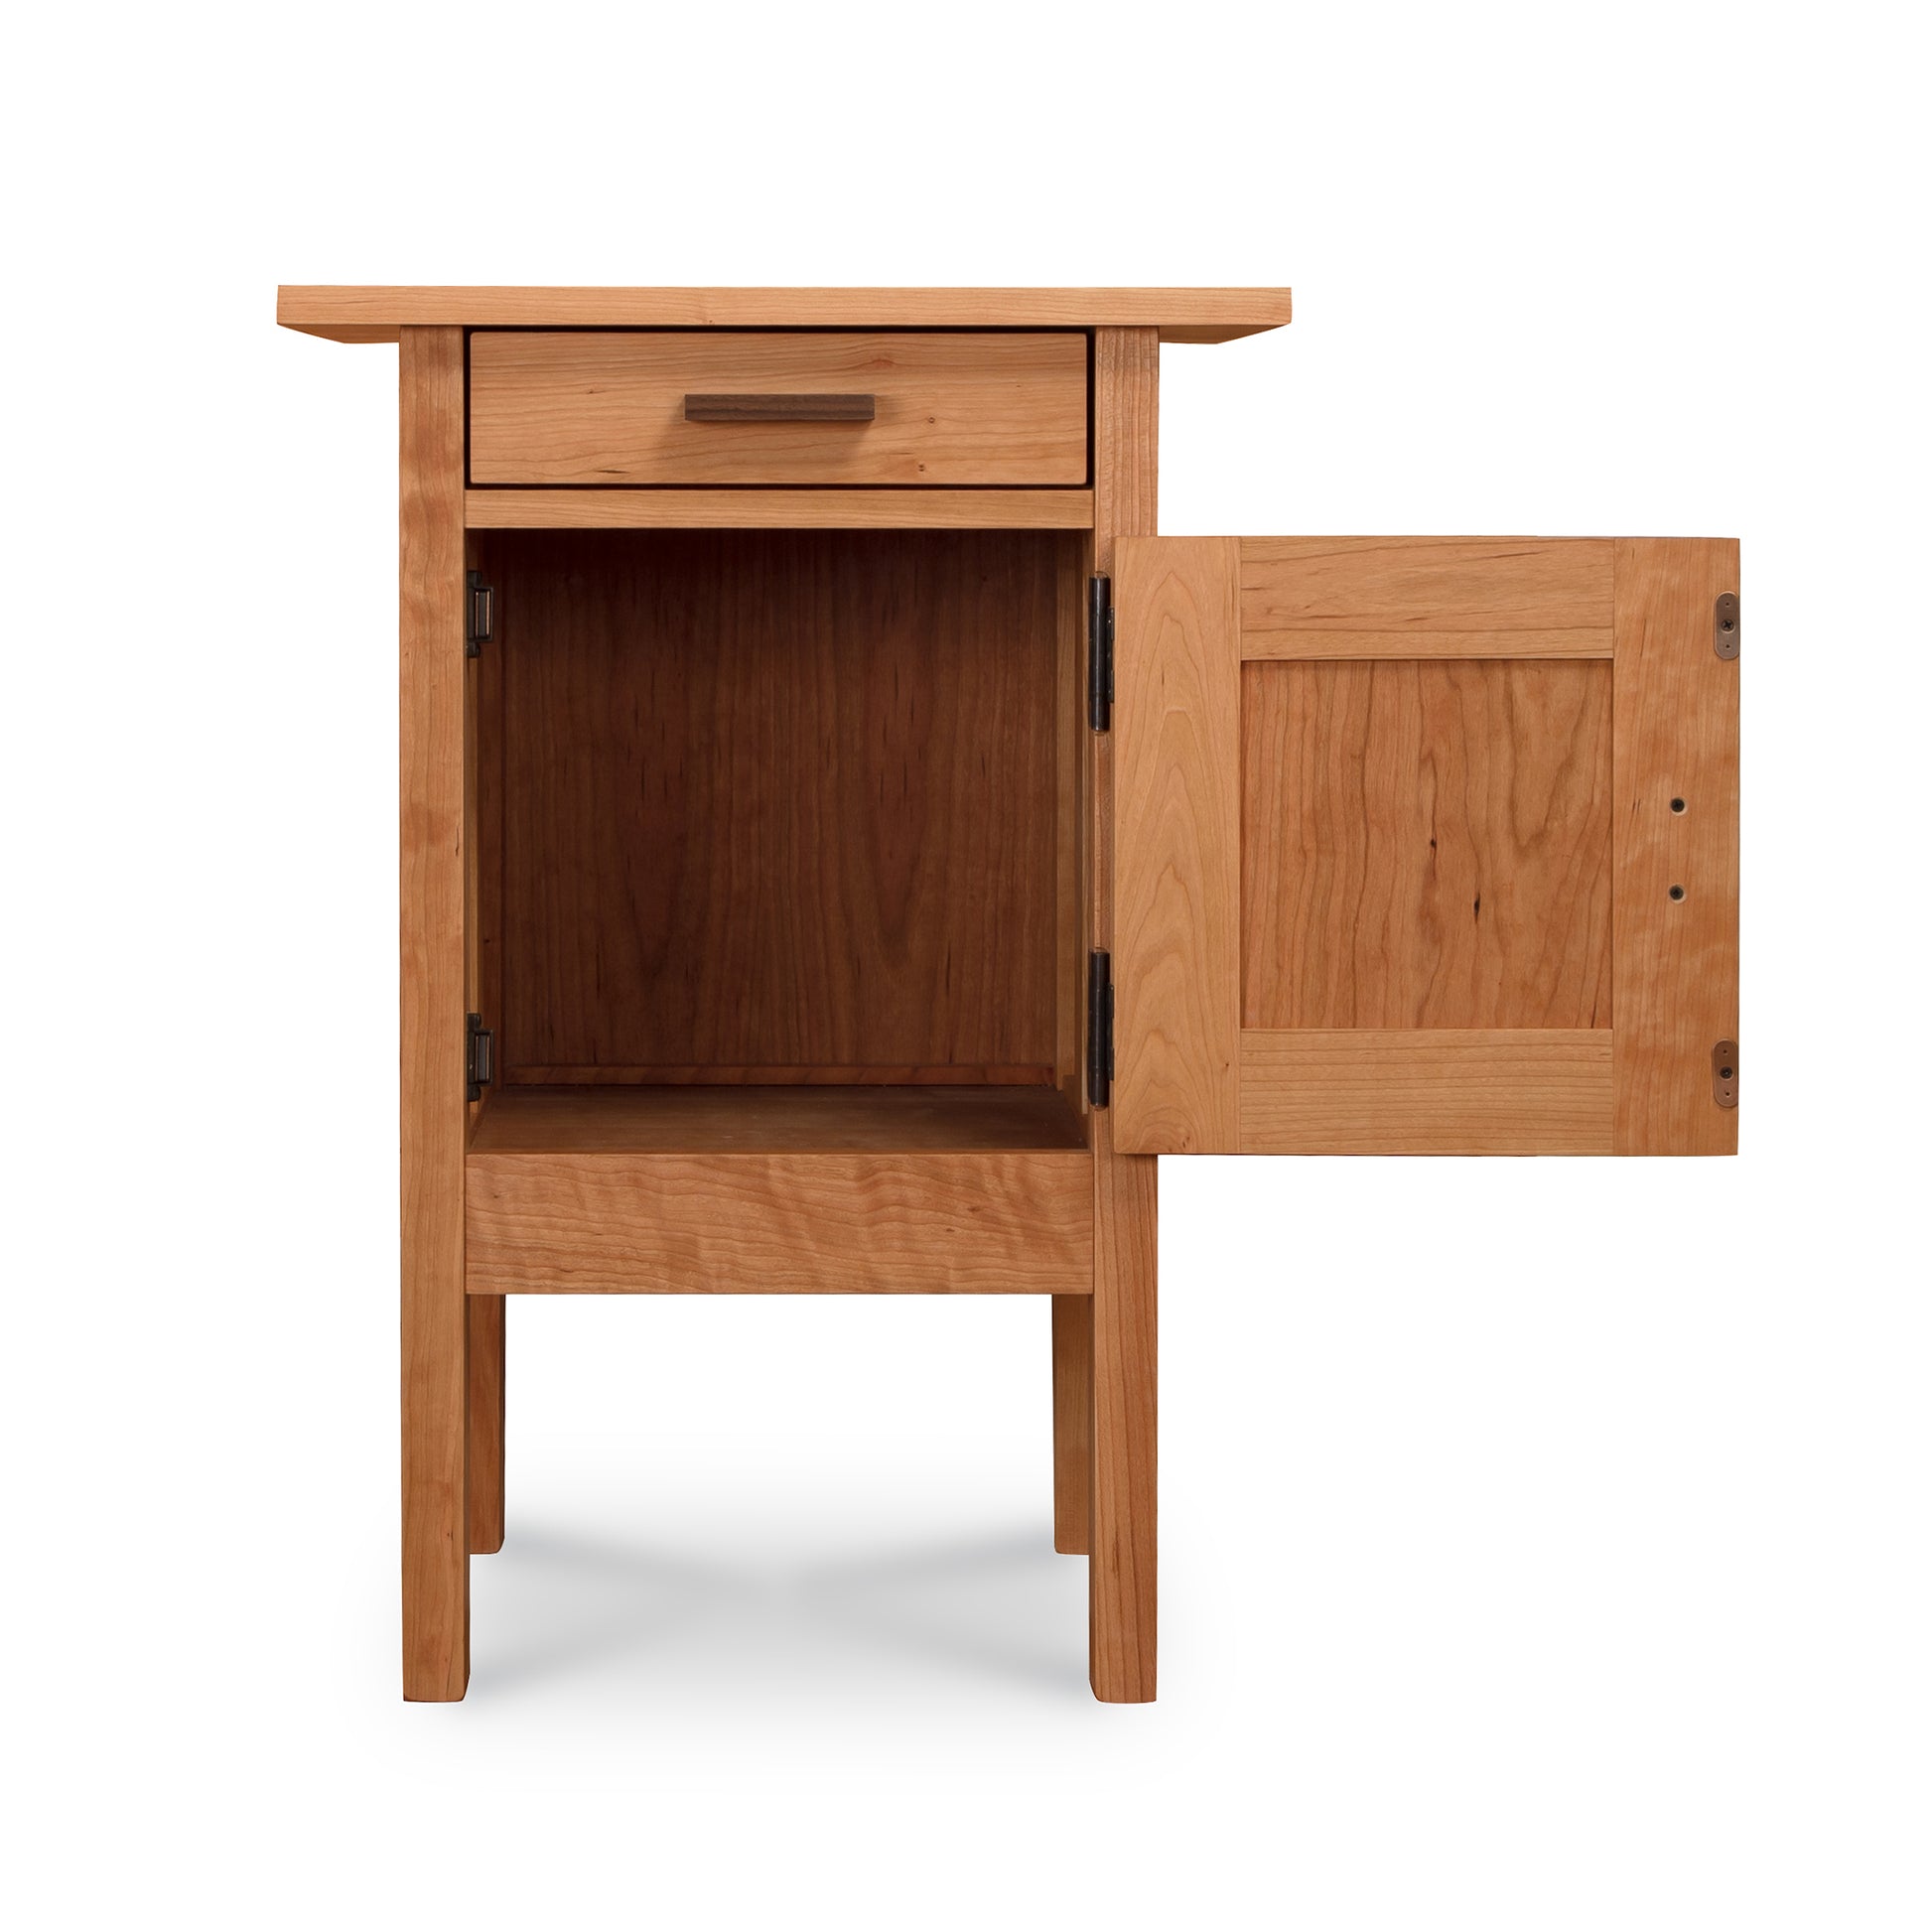 A Vermont Furniture Designs Modern Craftsman 1-Drawer Nightstand with Door, featuring solid hardwood construction and isolated on a white background.